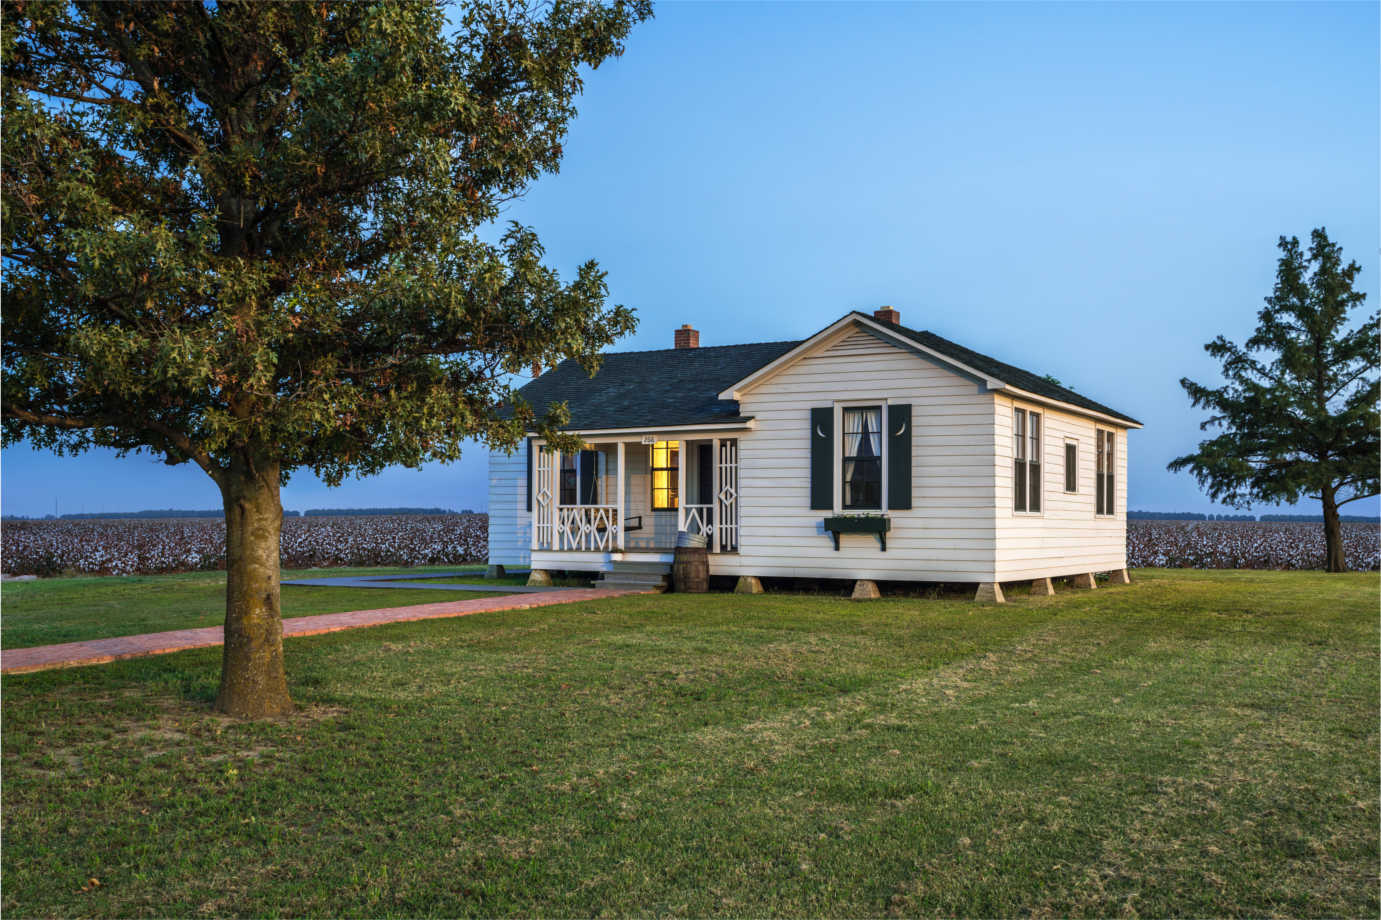 The Cash homestead, restored with funding from the National Endowment for the Humanities, has brought visitors from every state and 48 foreign countries to the rural town of Dyess, Arkansas. Image courtesy of Heritage Sites at Arkansas State University.